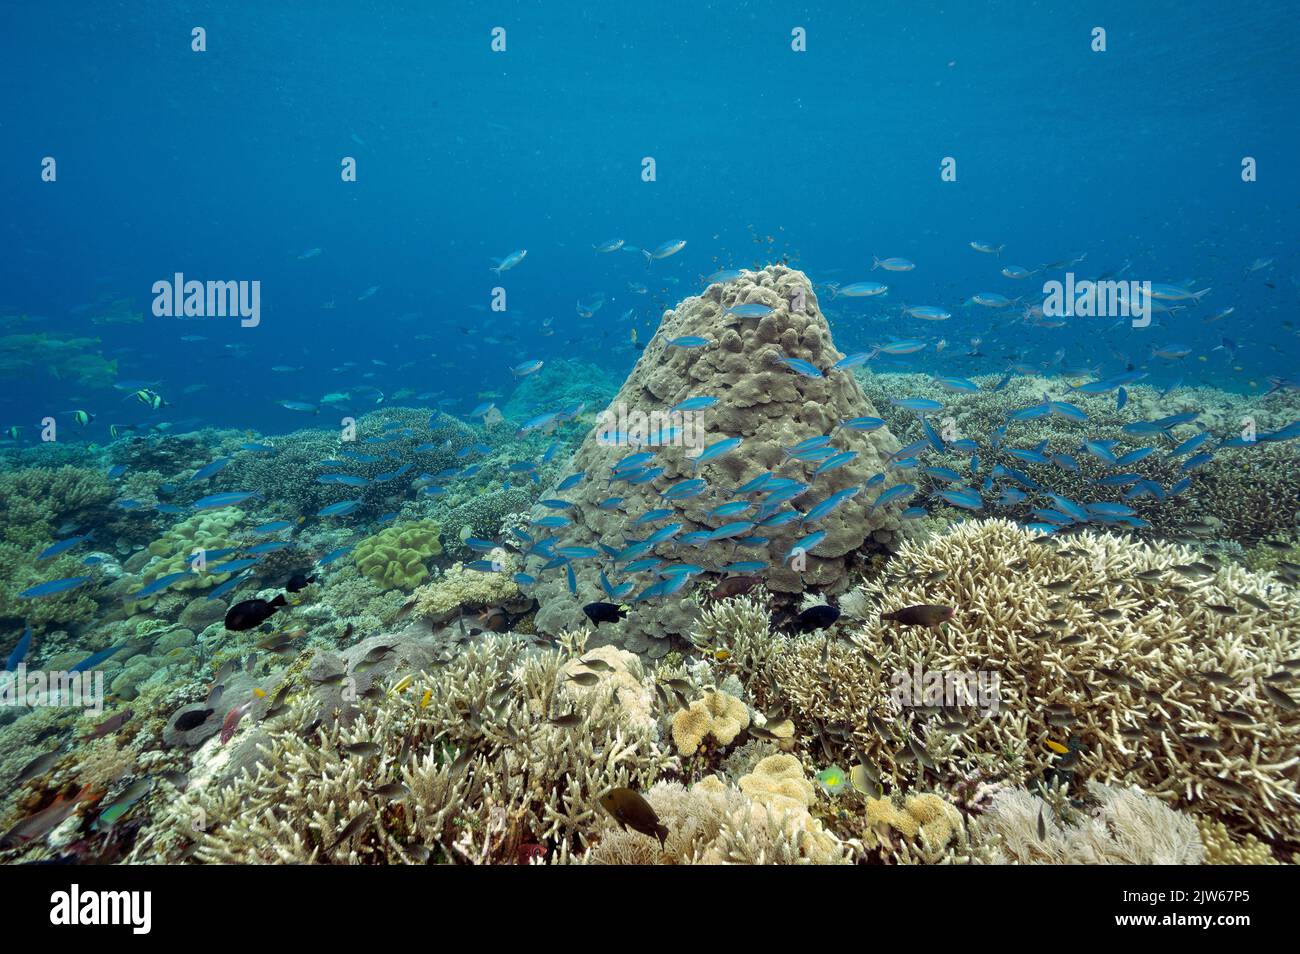 Reef scenic with fusuliers and pristine haed corals, Raja Ampat Indonesia. Stock Photo